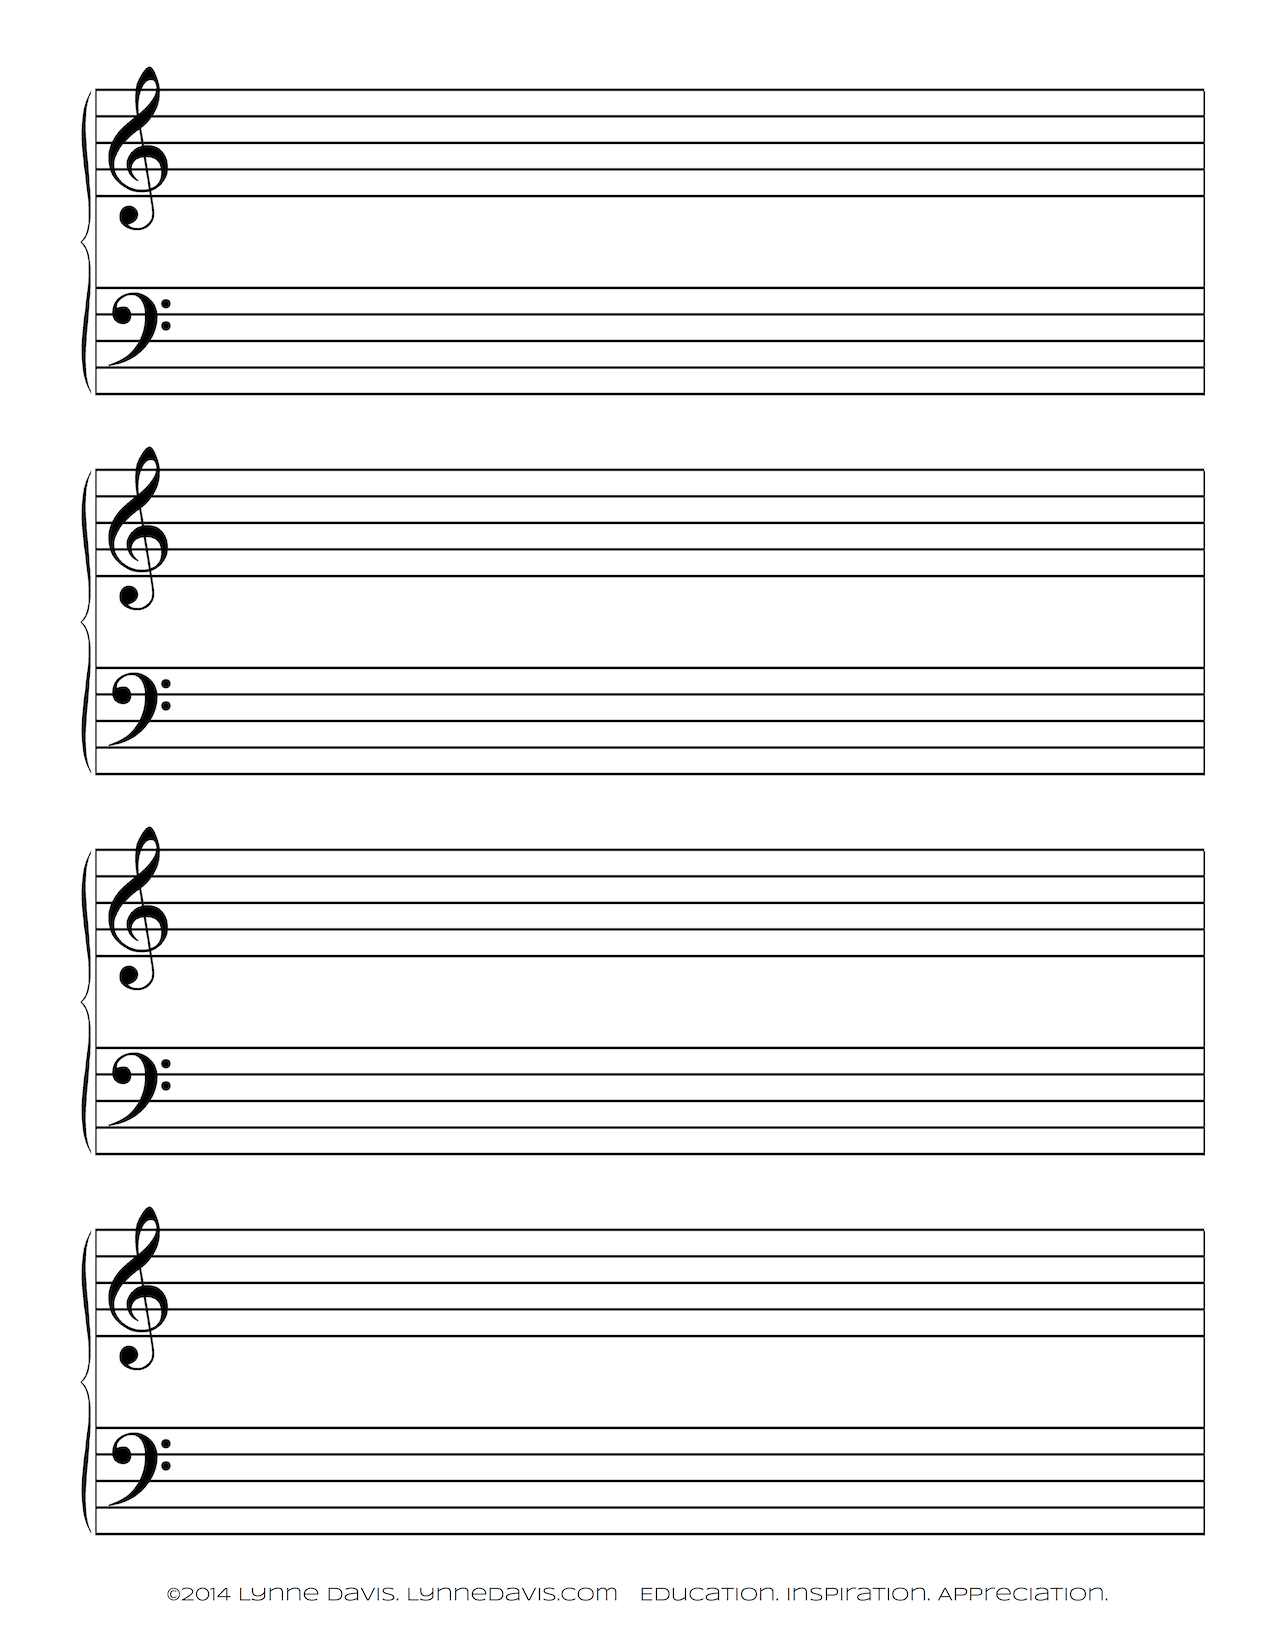 order-your-own-writing-help-now-how-to-write-your-own-music-on-sheet